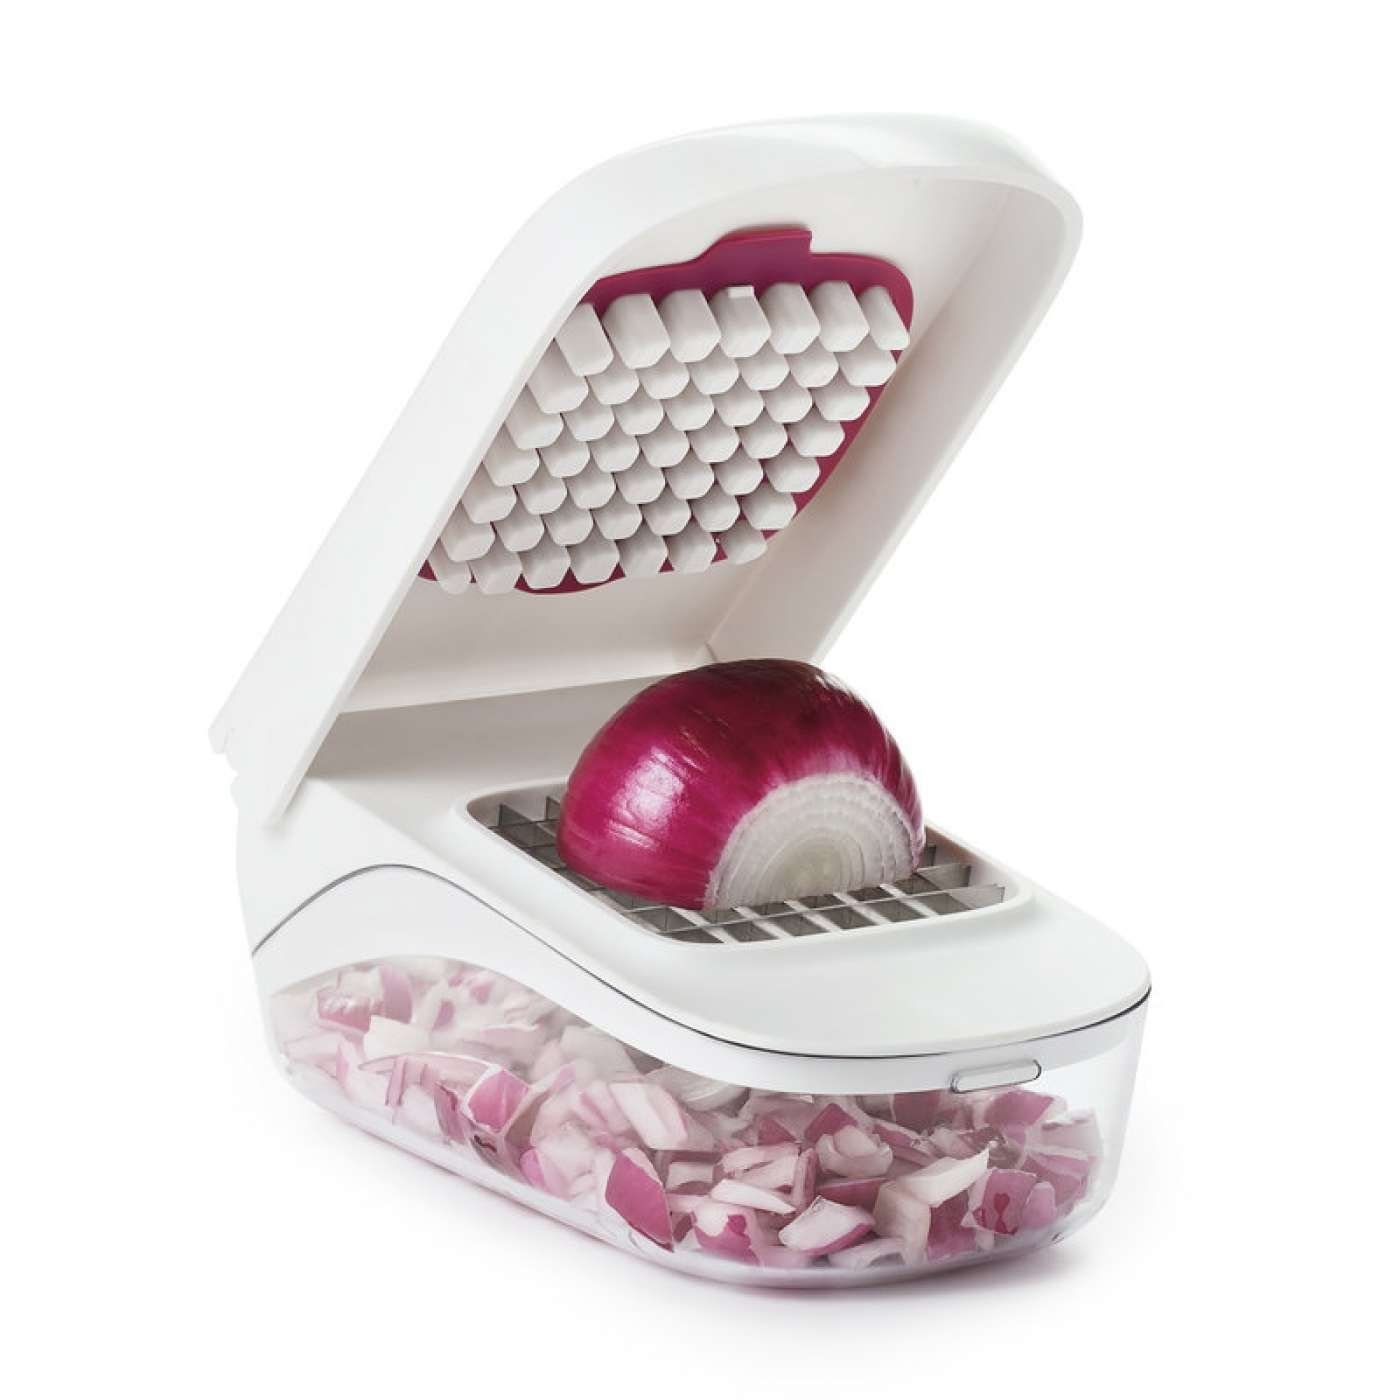 https://cdn.everythingkitchens.com/media/catalog/product/cache/70d878061ea71e5b62358b2b67547186/1/1/11122600_oxo_vegetable_chopper_with_easy_pour_opening_-_2.jpg